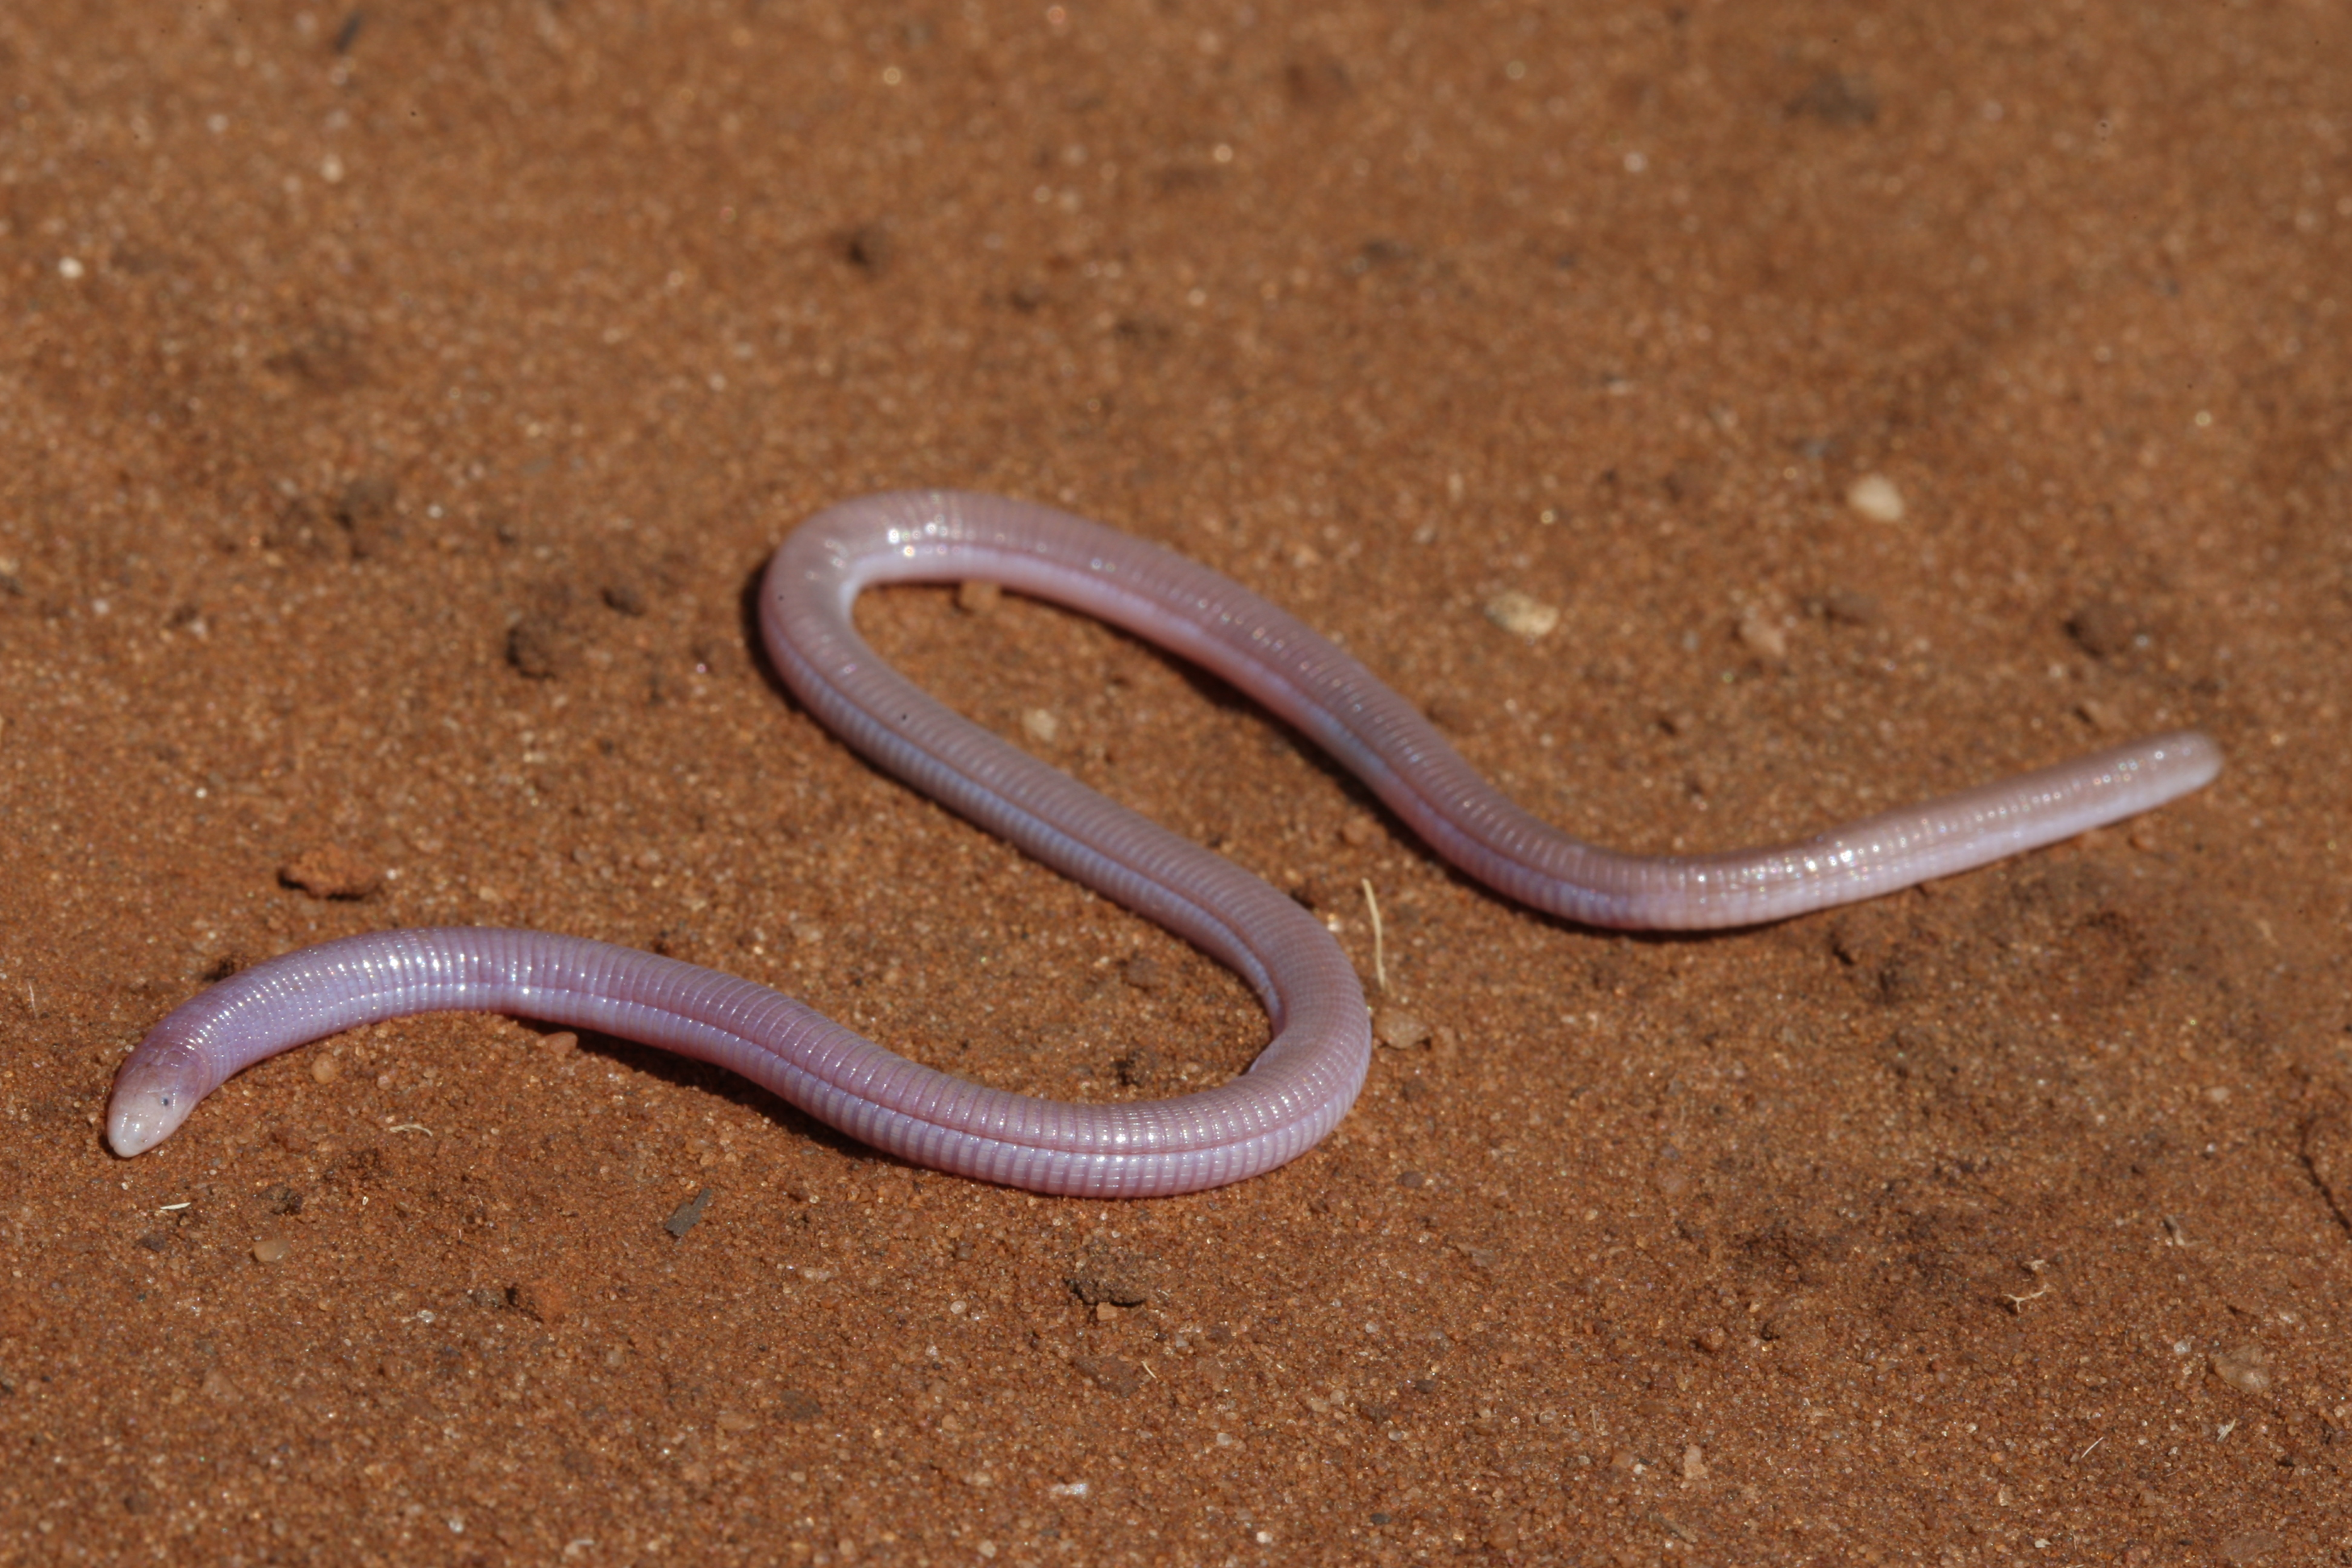 A Zygaspis quadrifrons is photographed in the wild in Koanaka, Botswana.